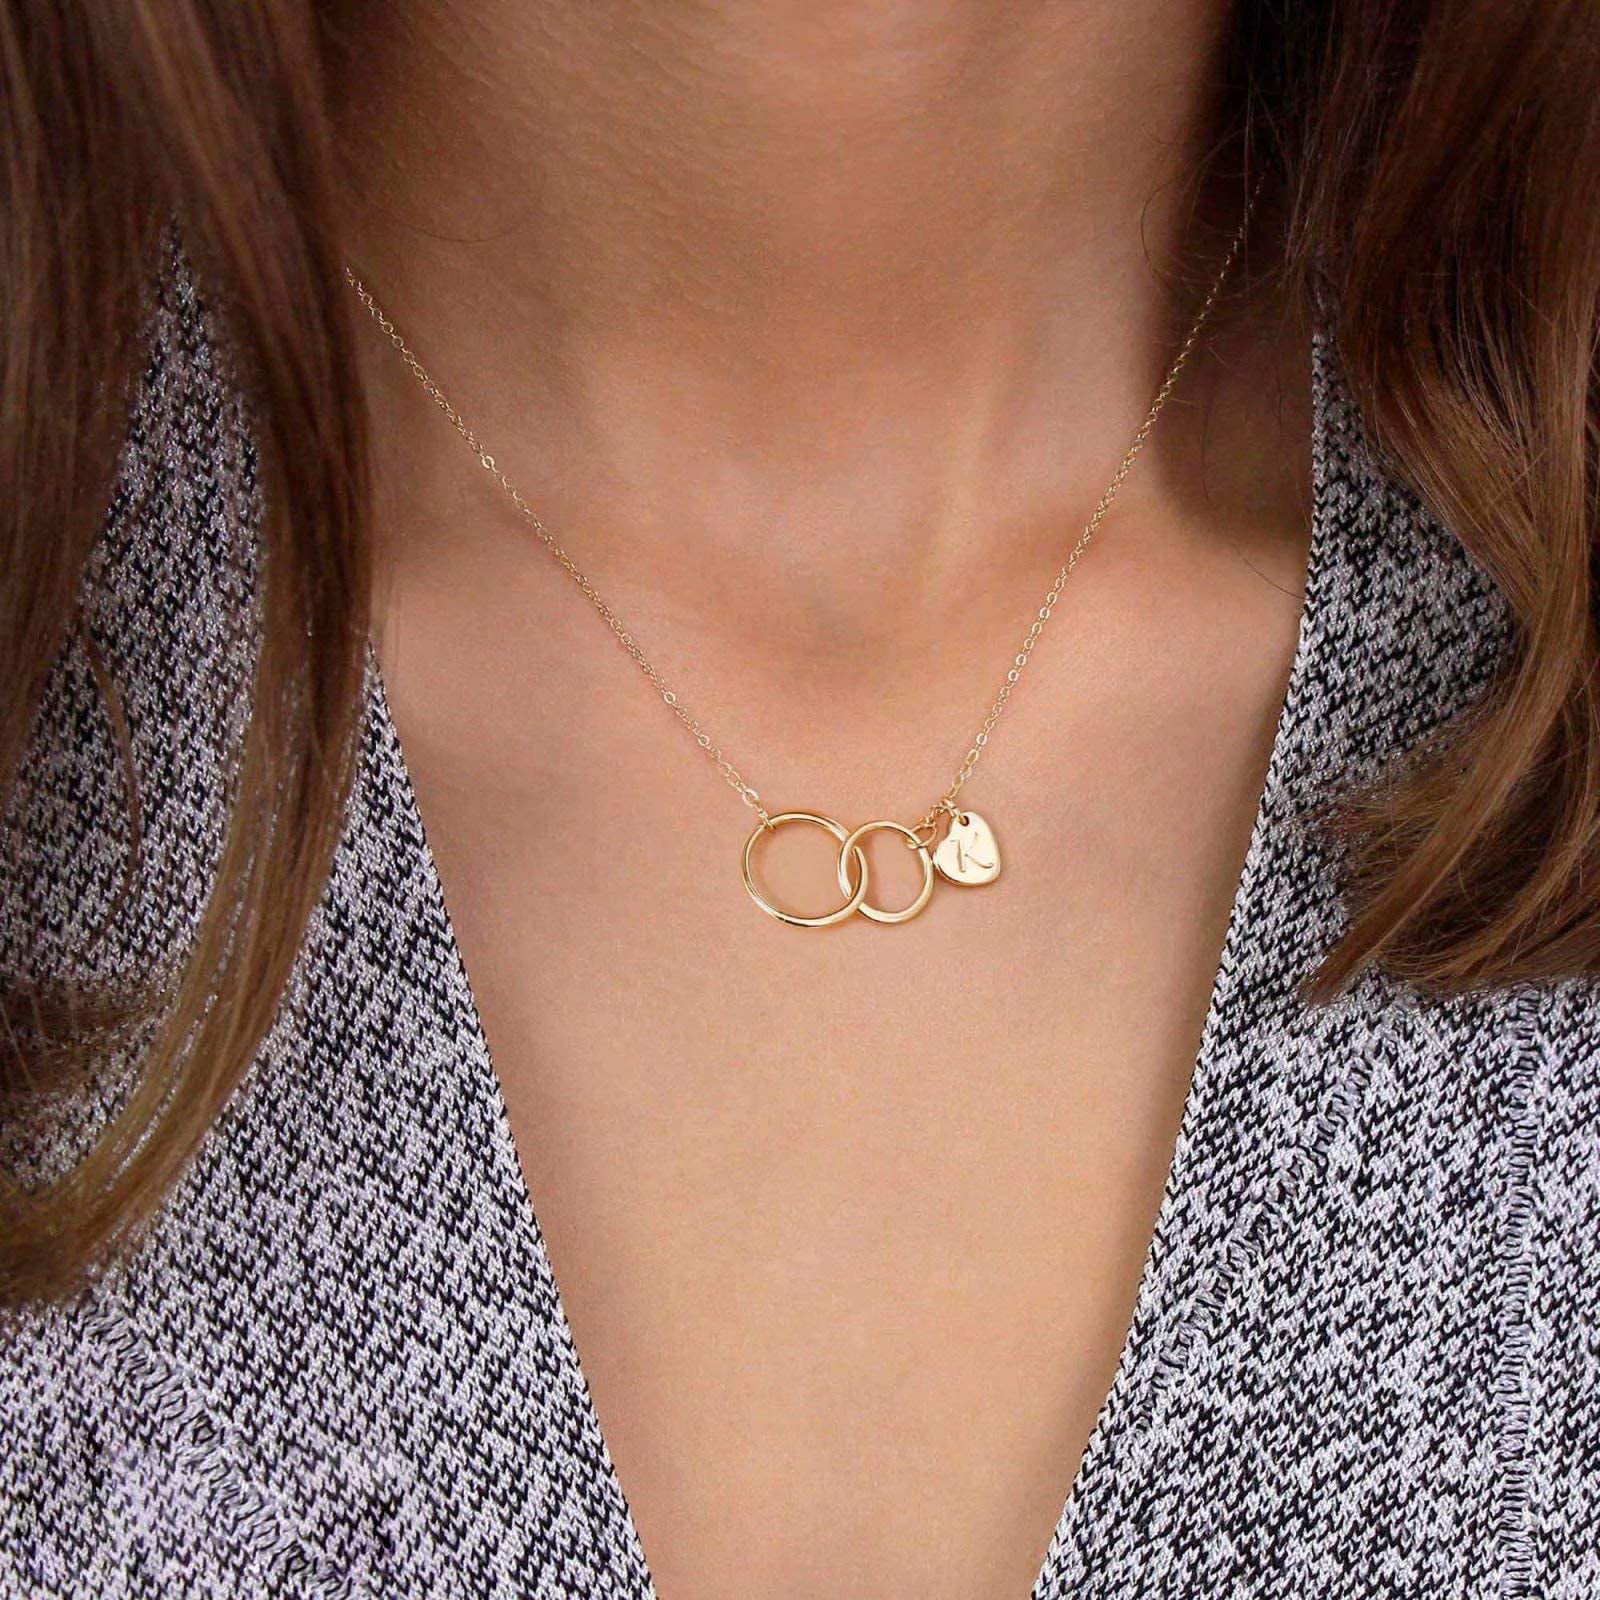 14K Gold Plated Infinity Circle Necklace Gifts for Mom and Daughter Heart Initial Necklace Mother Daughter Gifts Mothers Day Christmas Birthday Gifts for Women Girls IEFLIFE Mother Daughter Necklace 